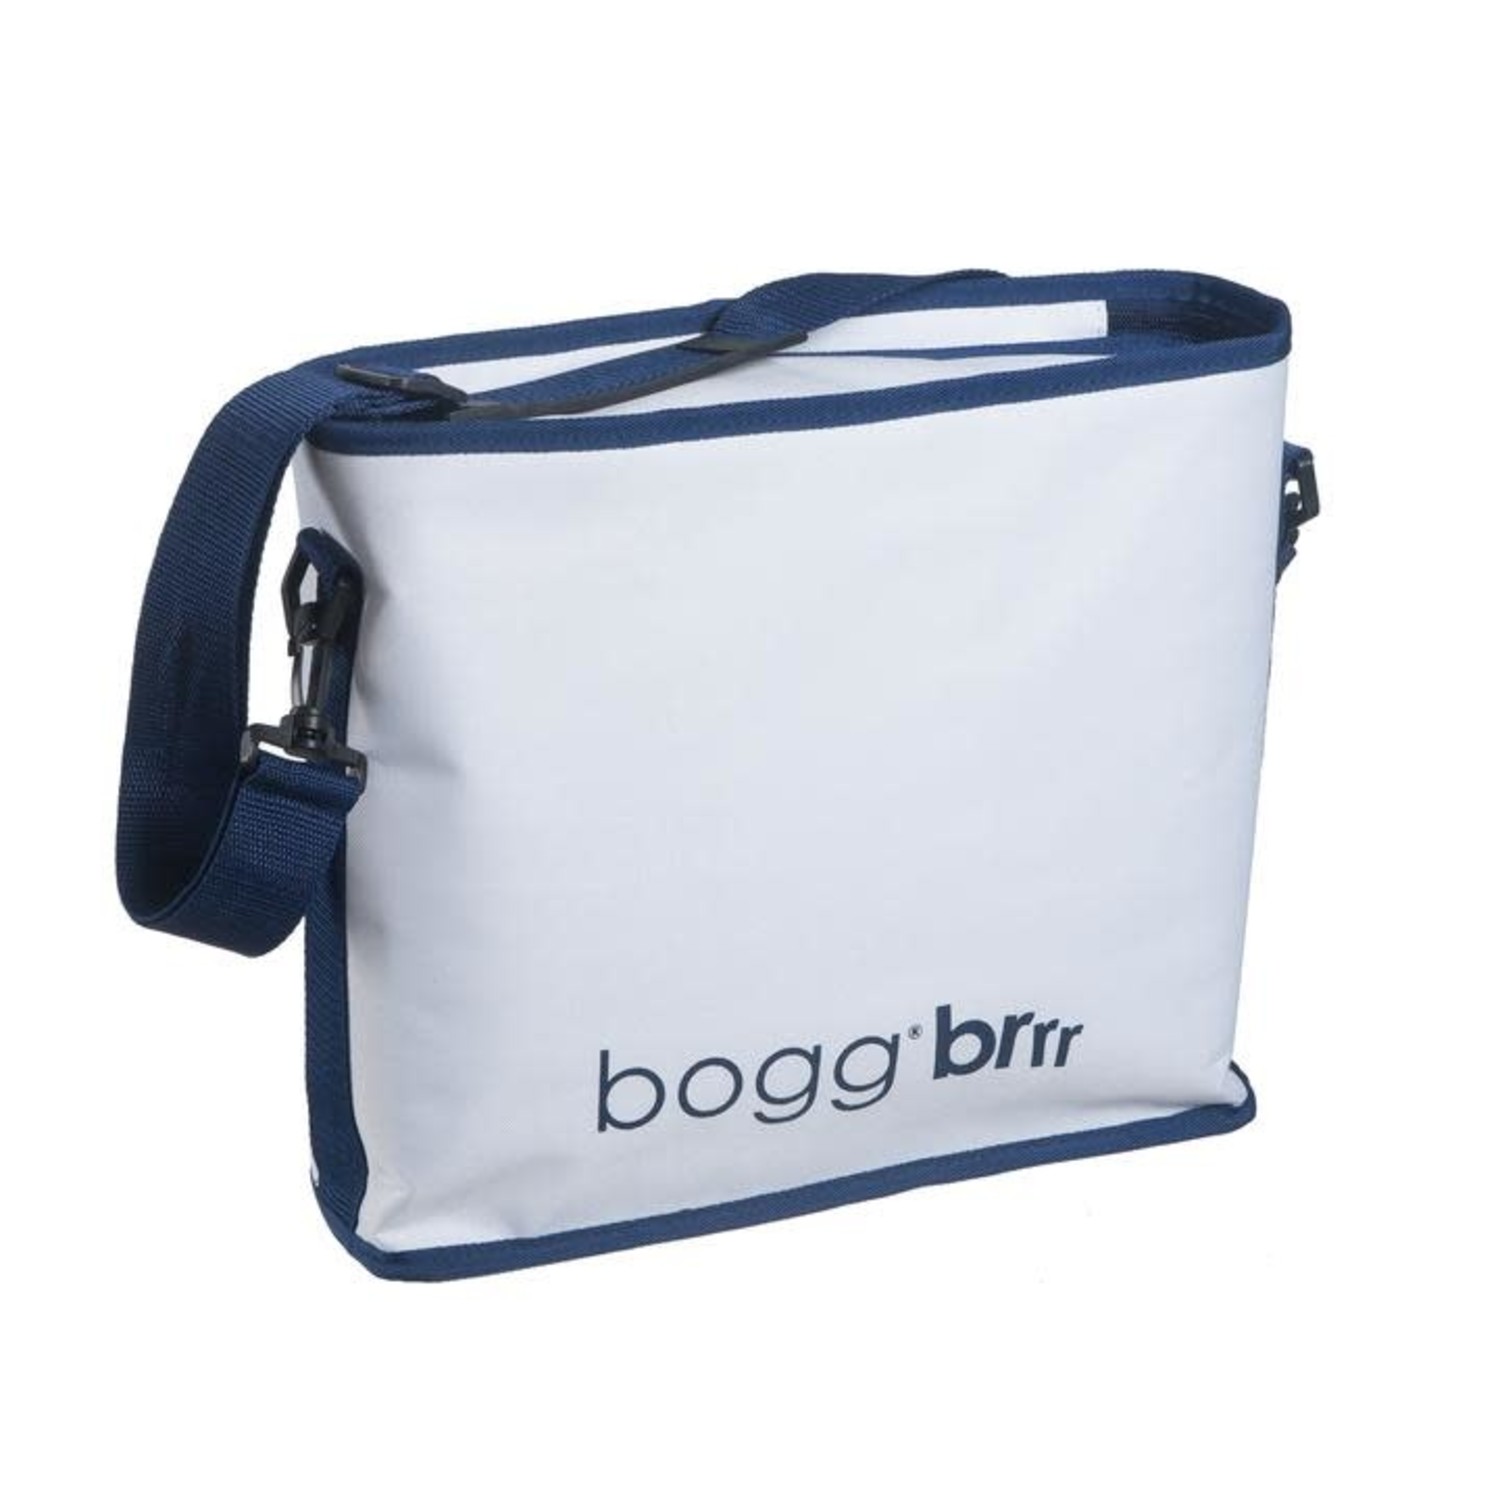 BOGG BAG Baby Bogg Brr - Amber Marie and Company